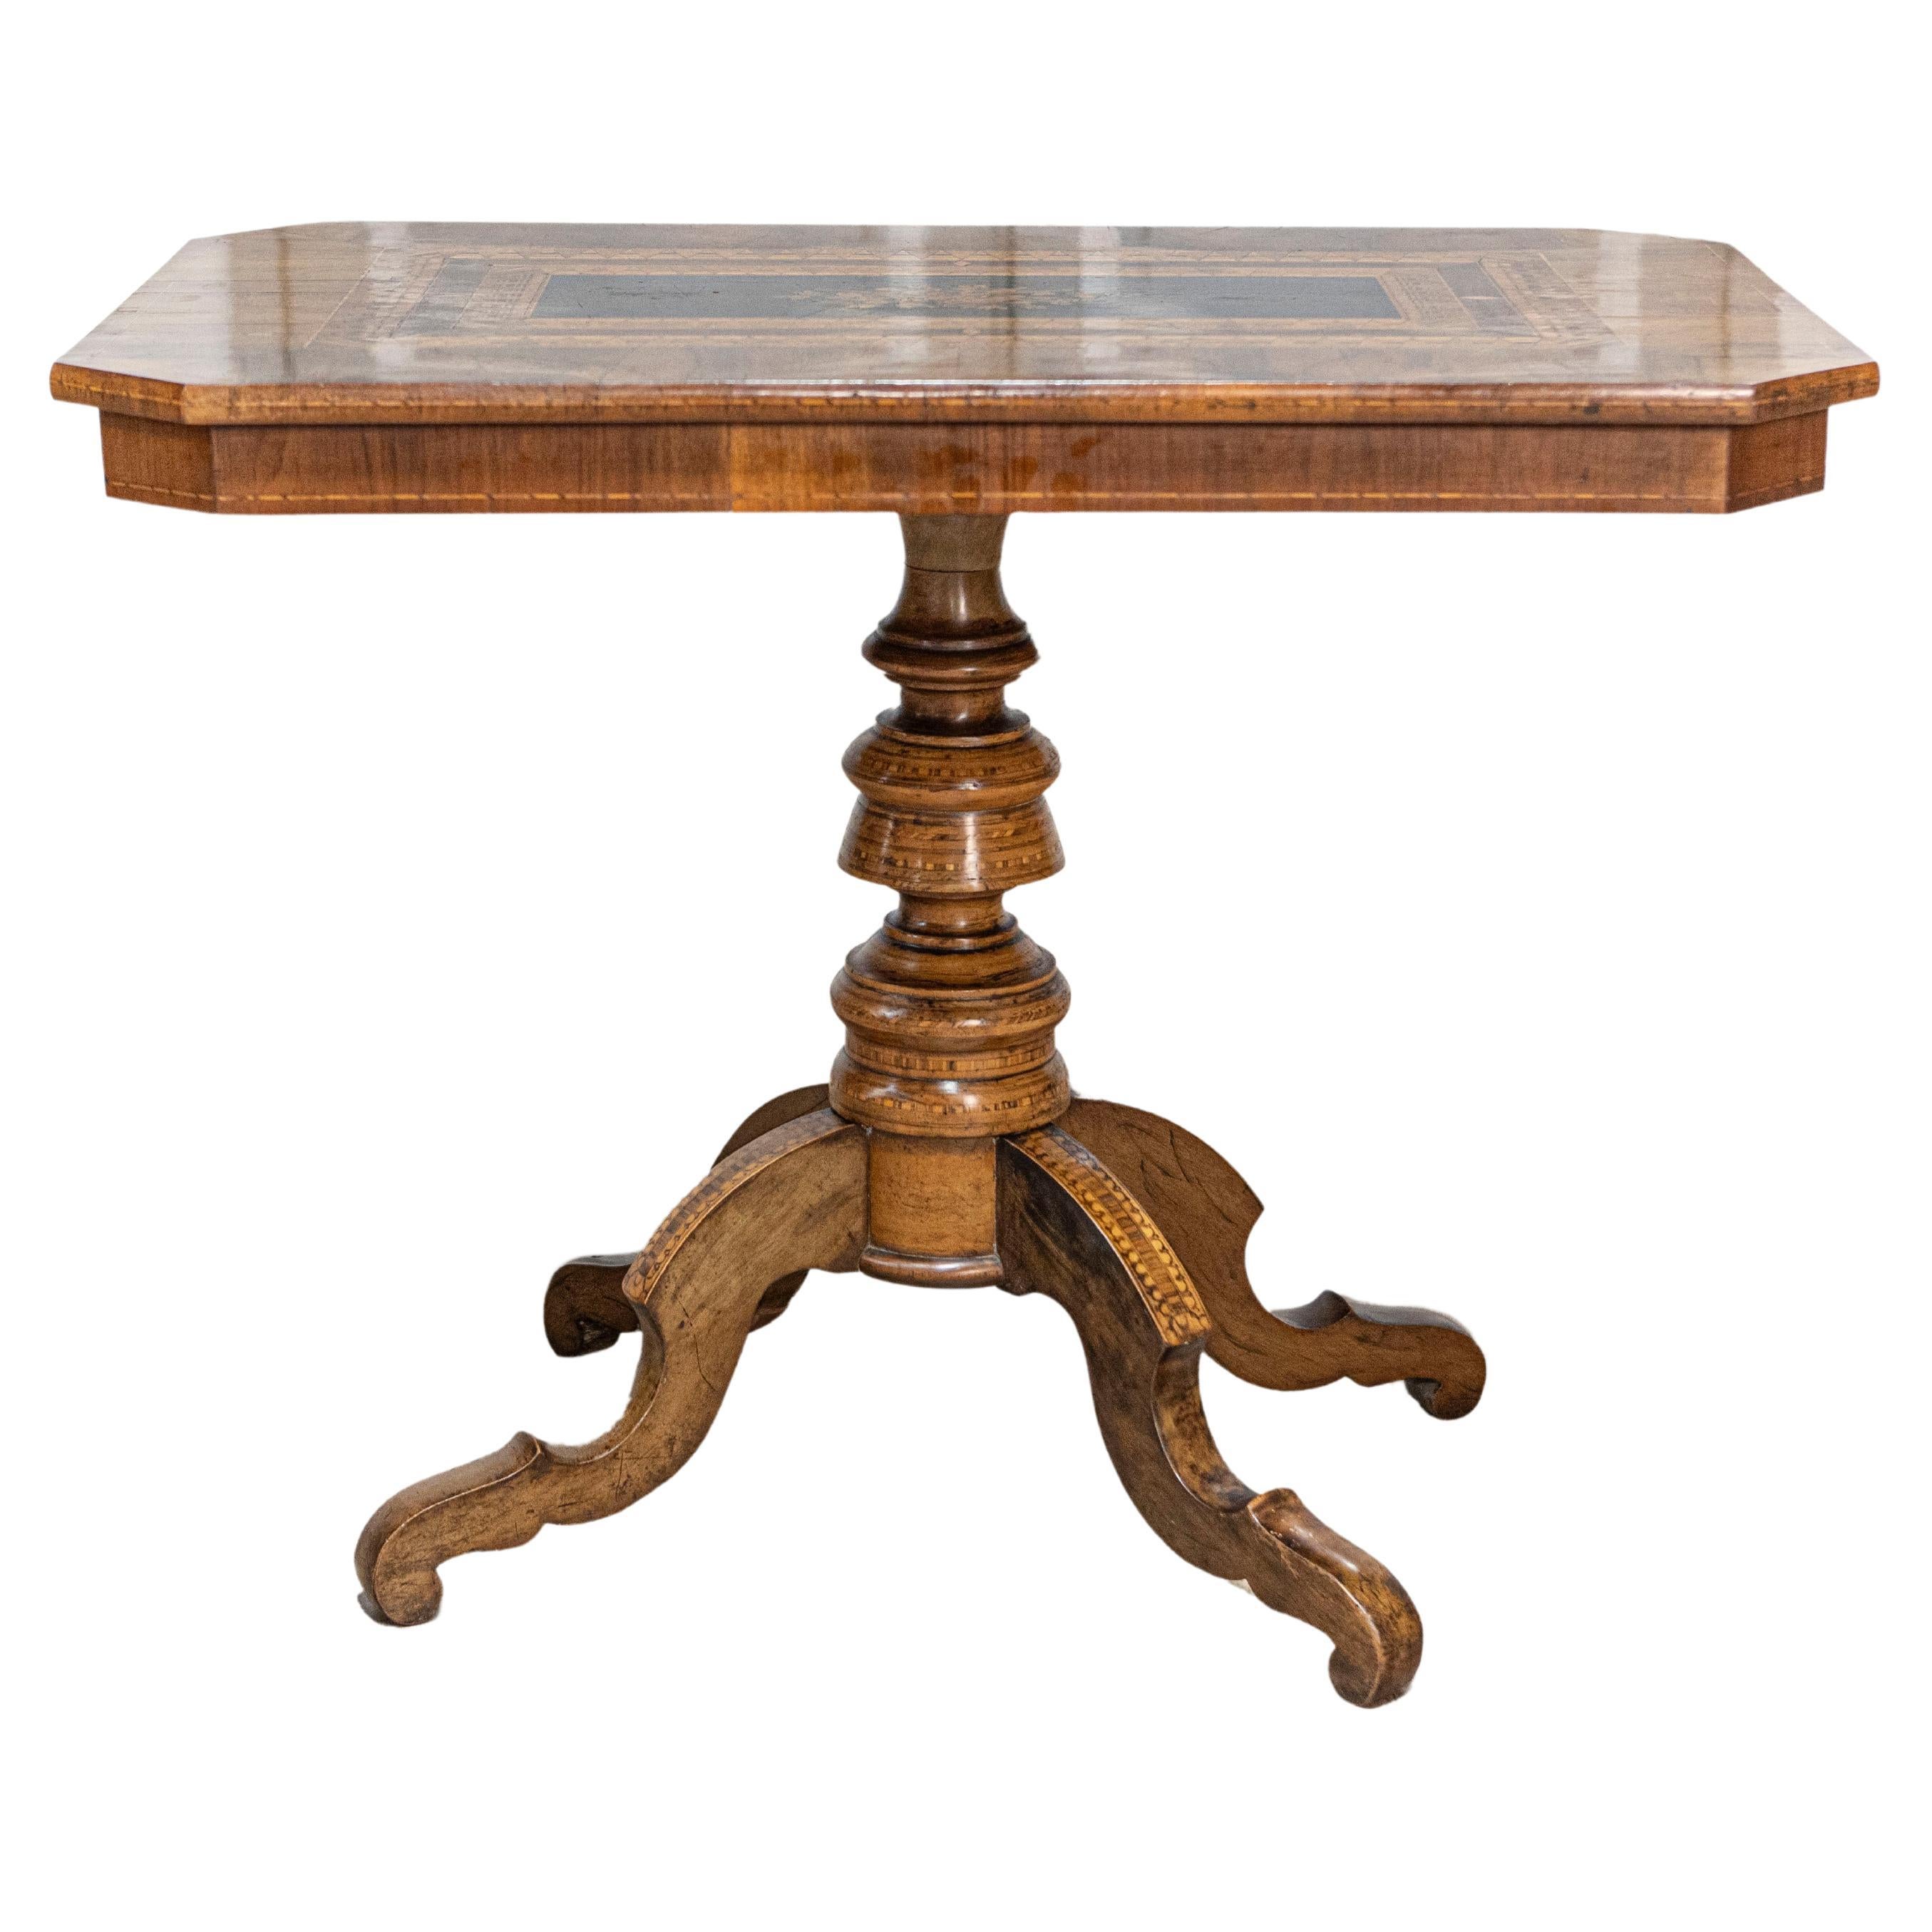 Italian 19th Century Walnut and Mahogany Center Table with Floral Marquetry For Sale